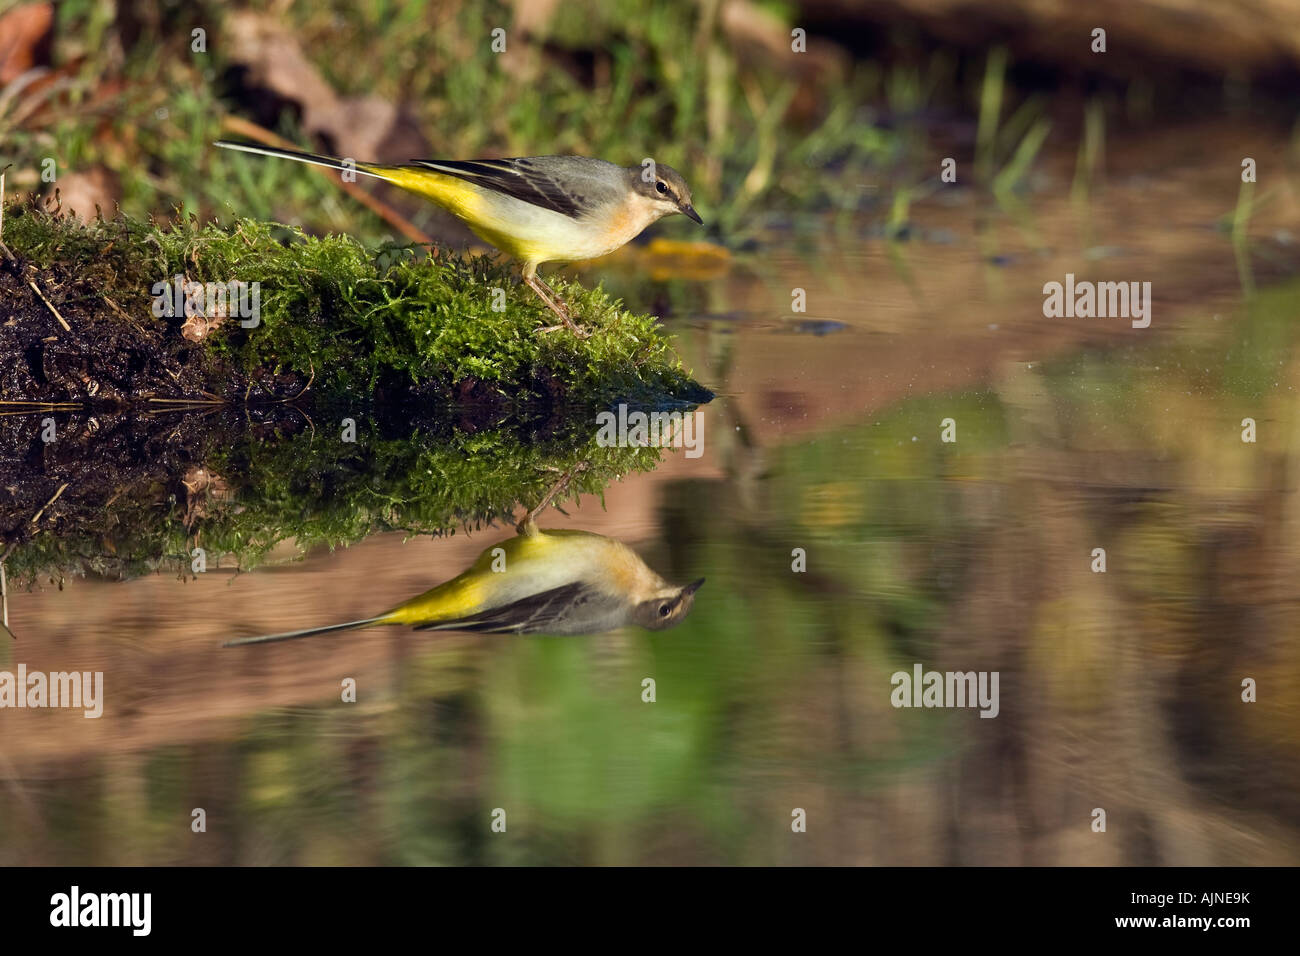 Grey wagtail motacilla cinerea feeding at waters edge with reflection in water Potton Bedfordshire Stock Photo